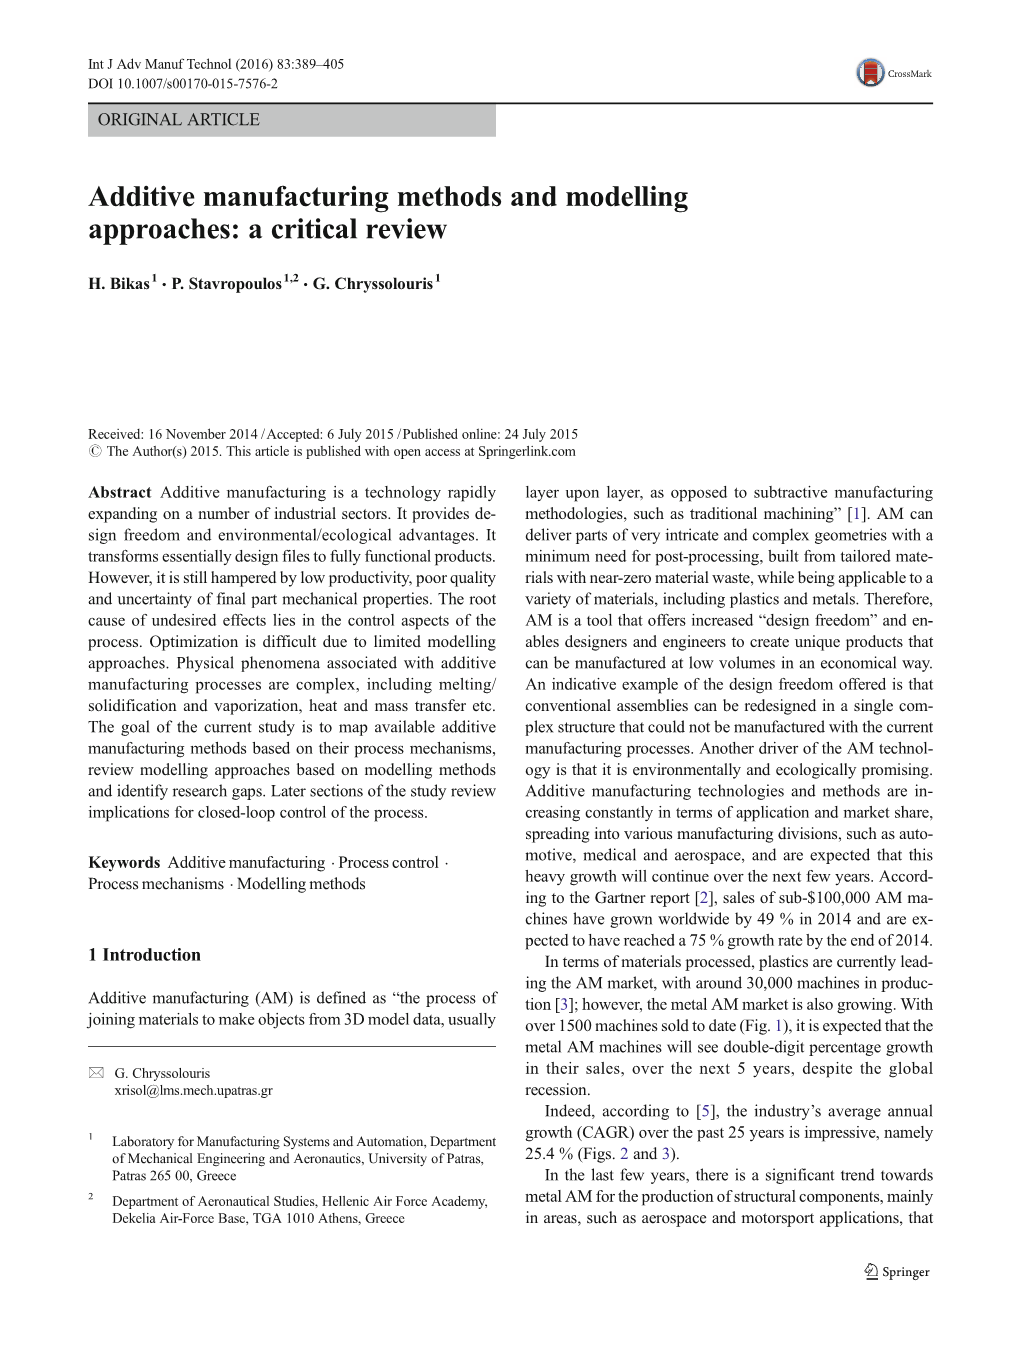 Additive Manufacturing Methods and Modelling Approaches: a Critical Review